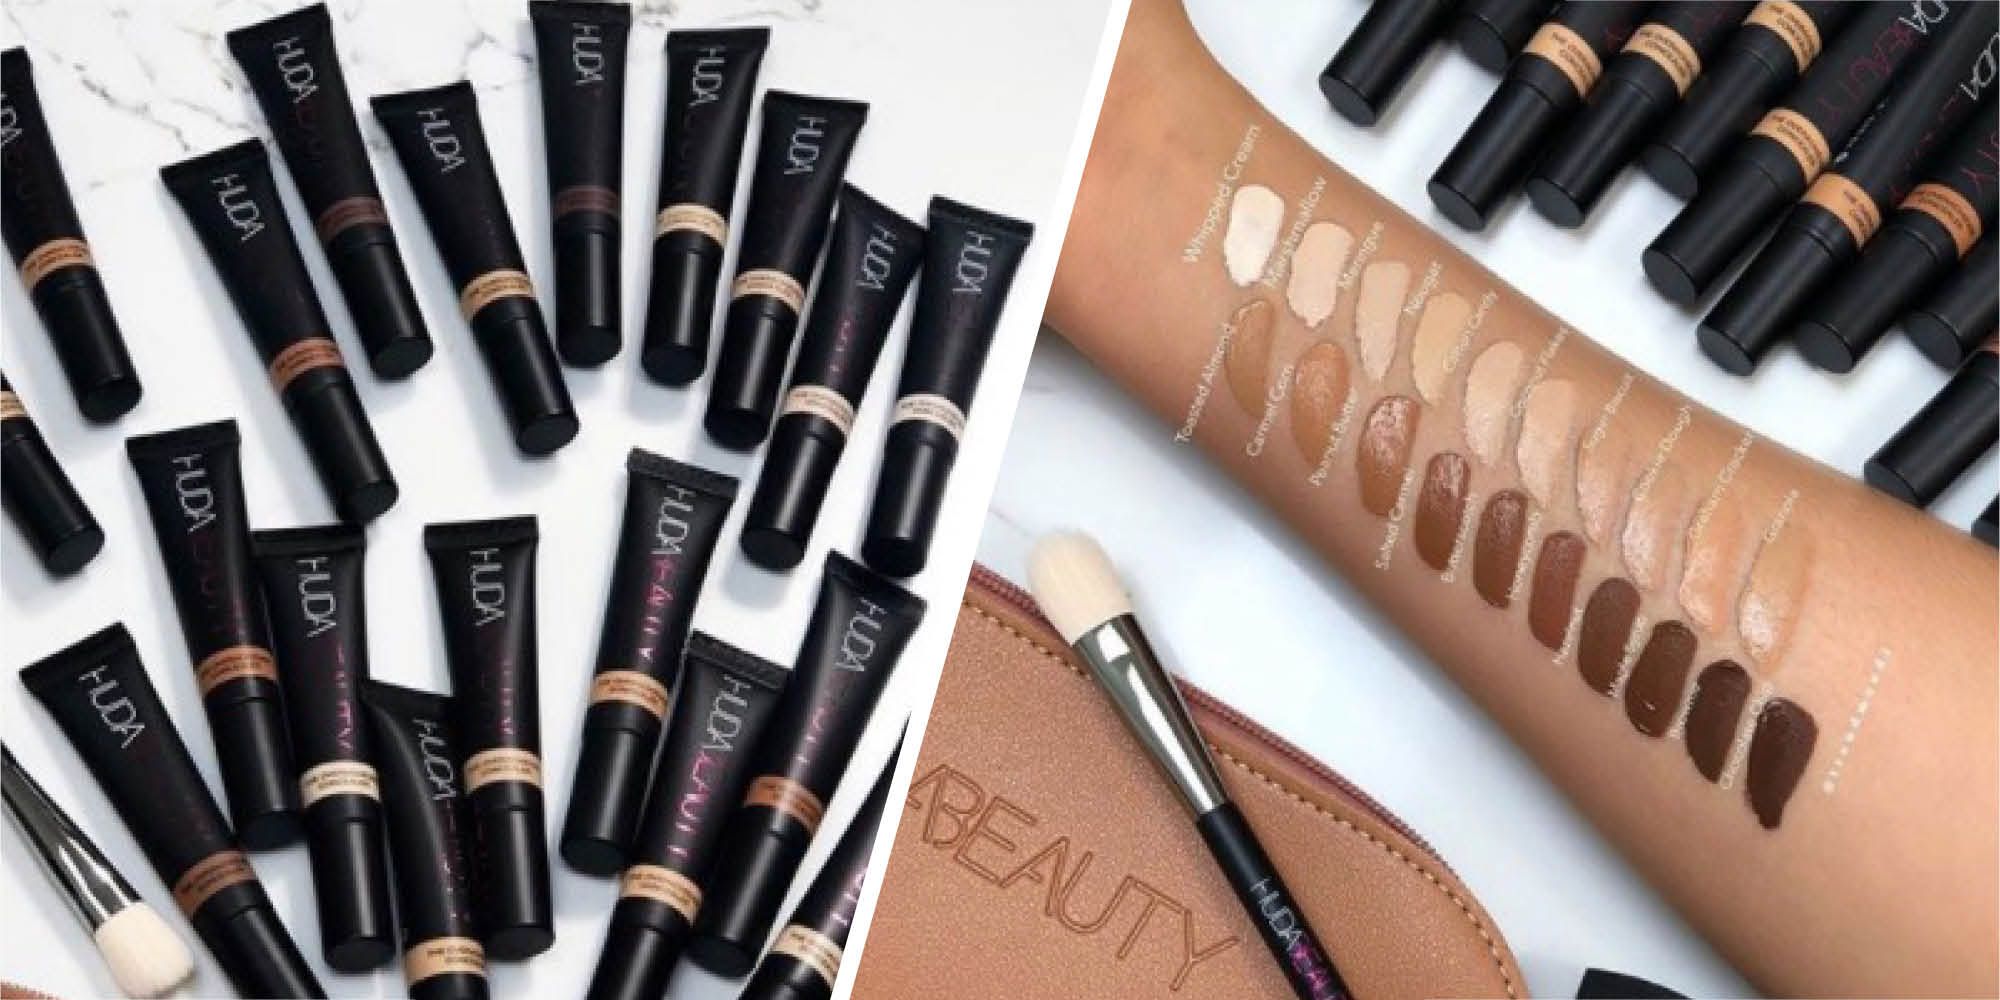 Huda Beauty's New Concealer Is The Makeup Product Under Been Waiting For